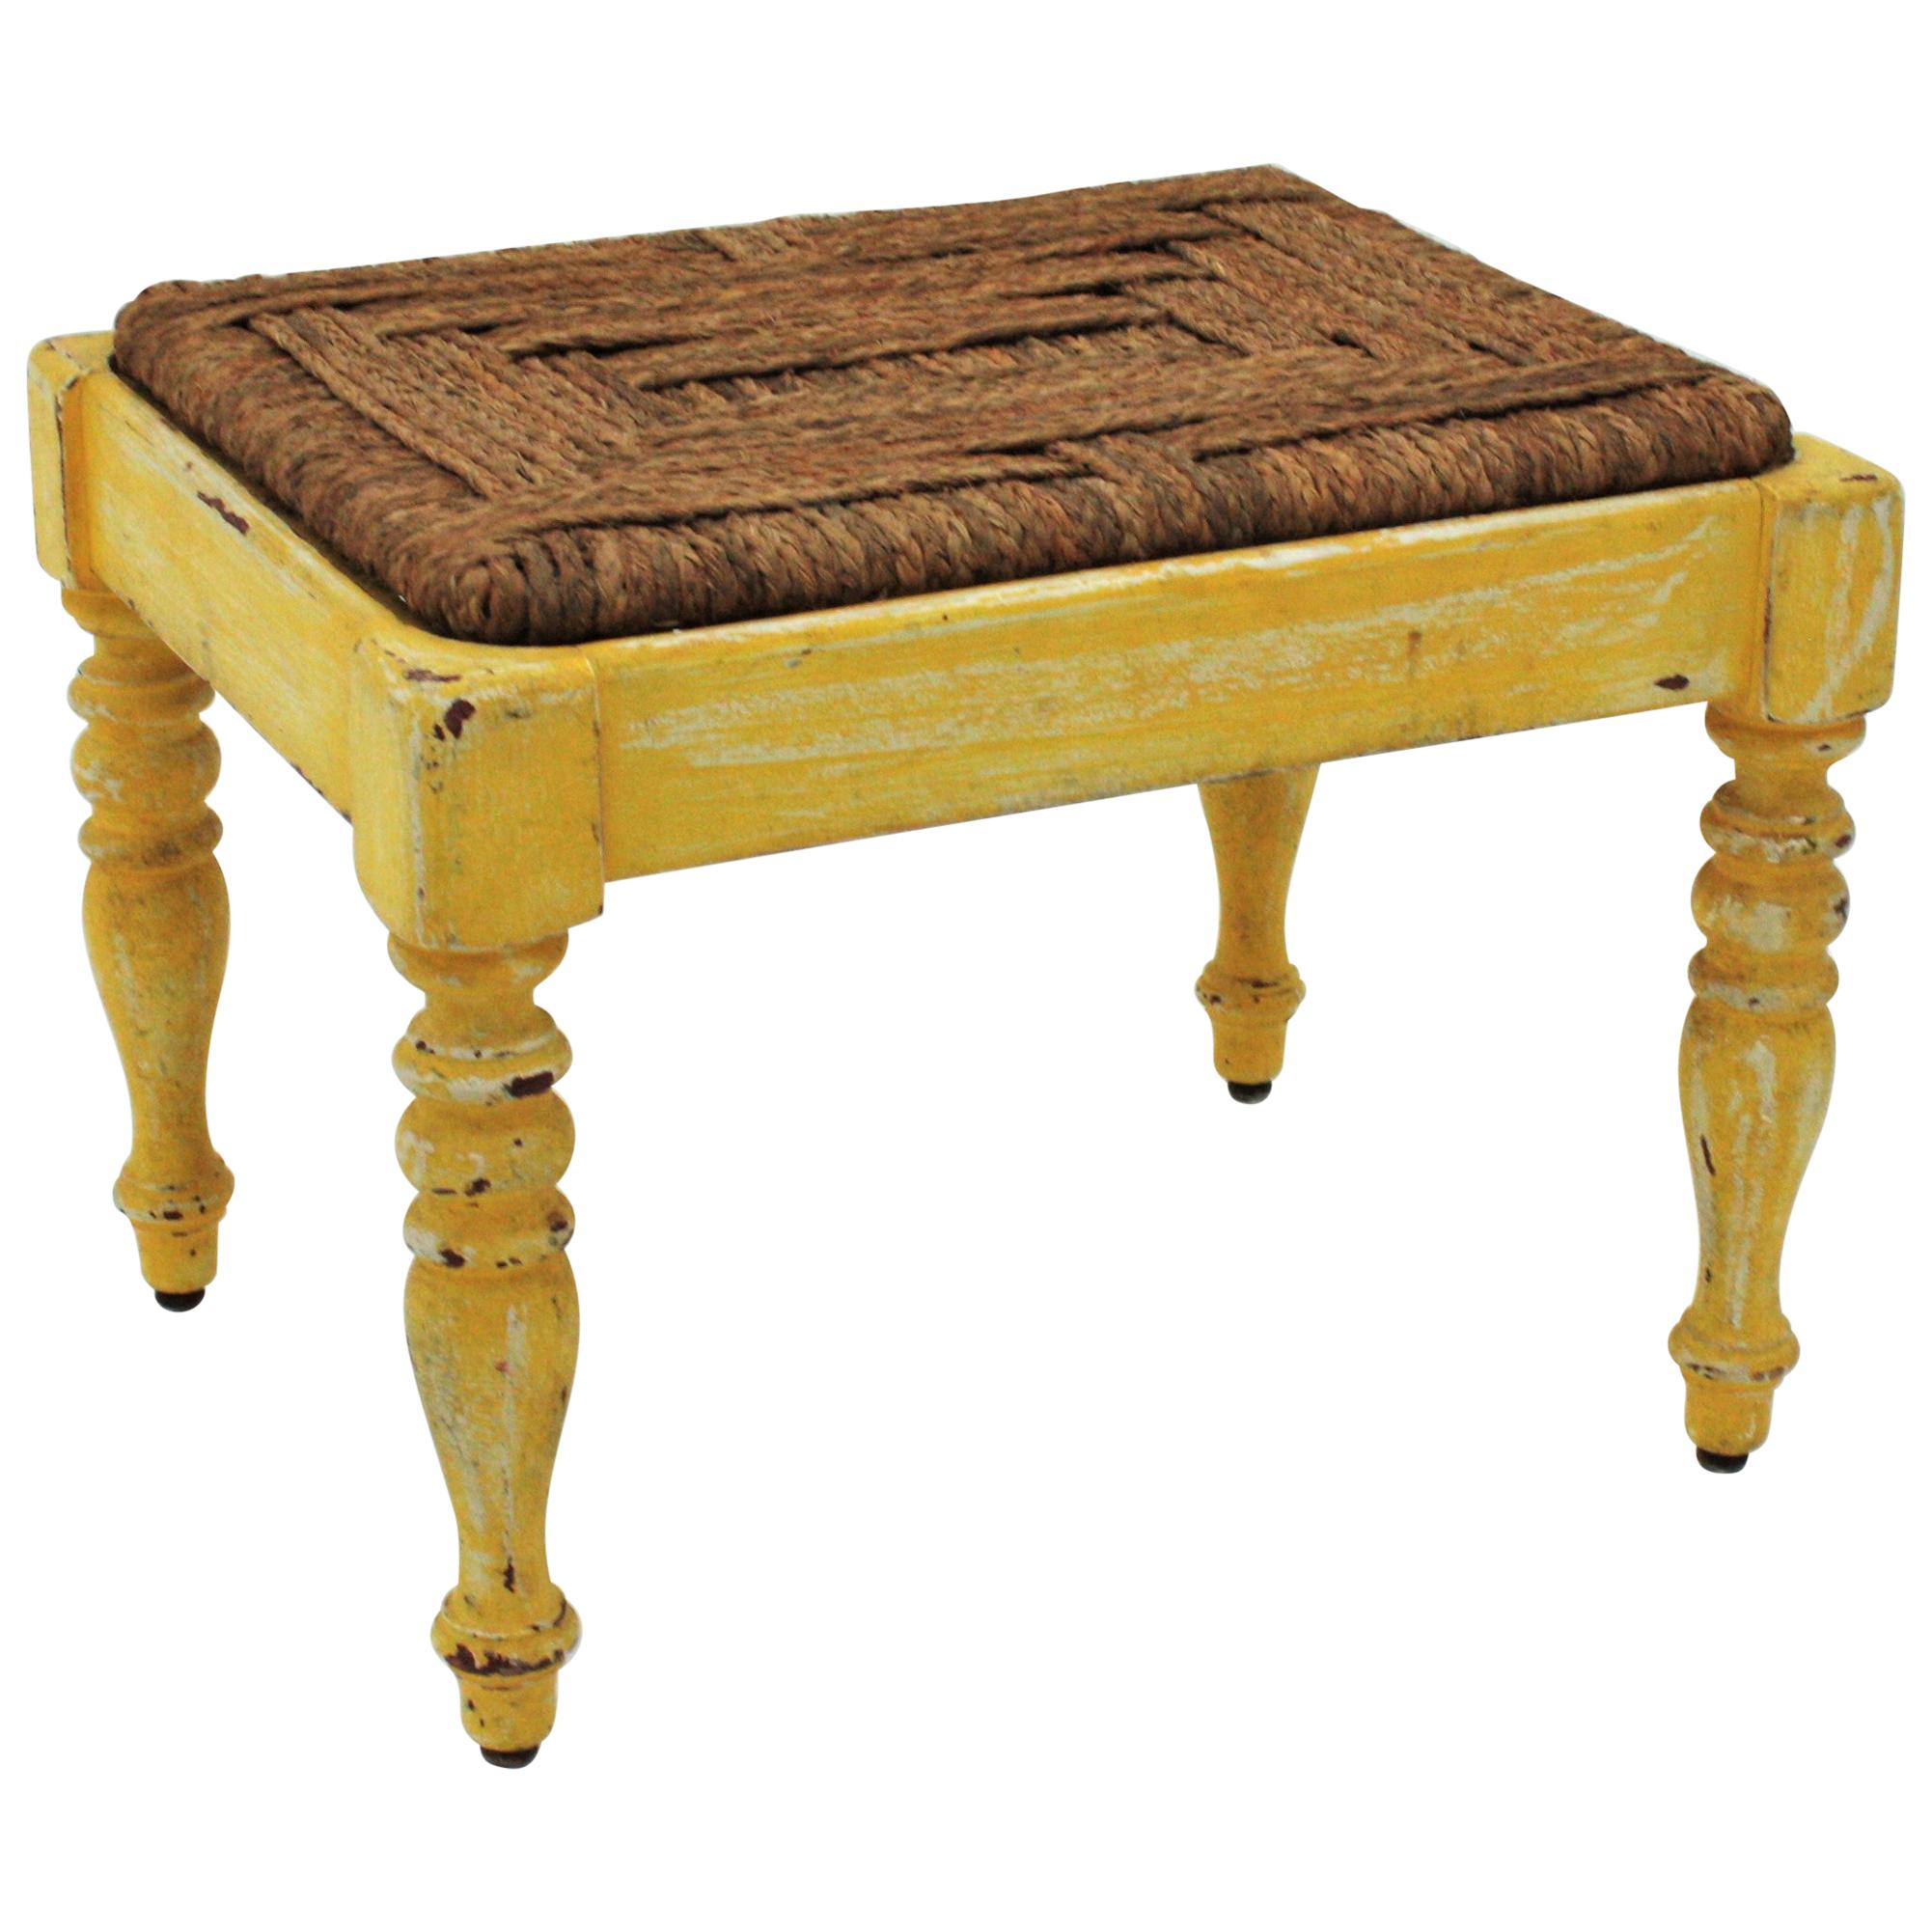 French Rustic Stool with Esparto Grass Seat and Yellow Patina